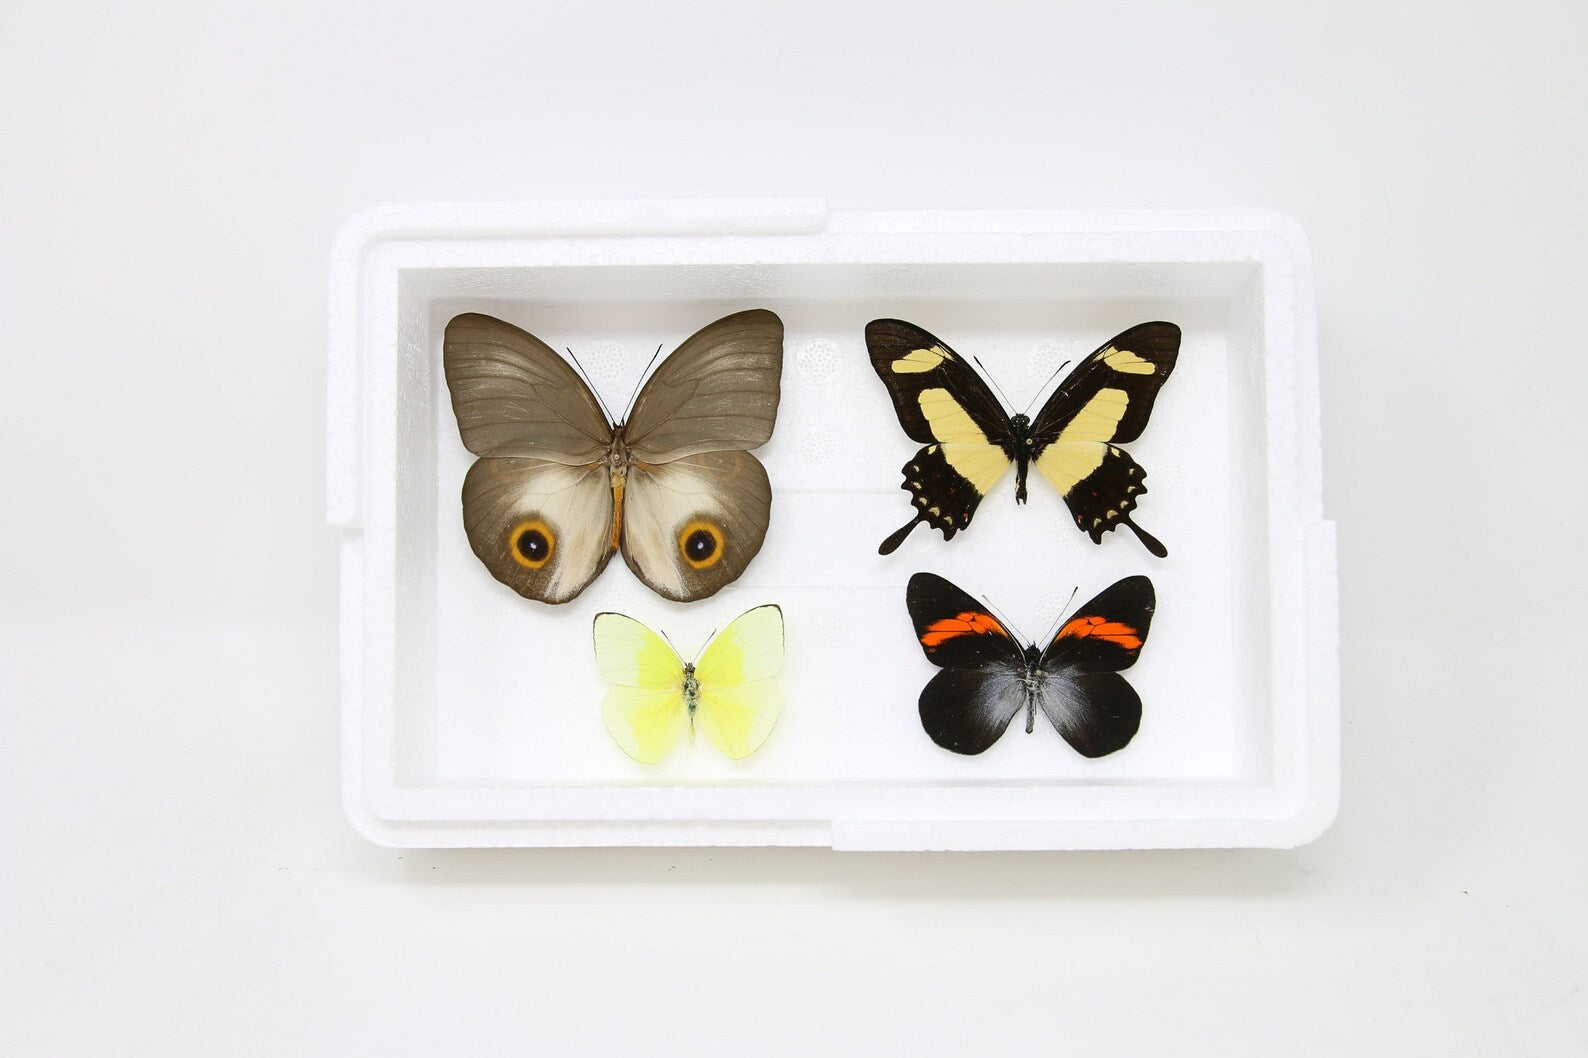 Pinned Tropical Butterflies, A1 Real Butterfly Pinned Set Specimens, Entomology Taxidermy (#BUT73)